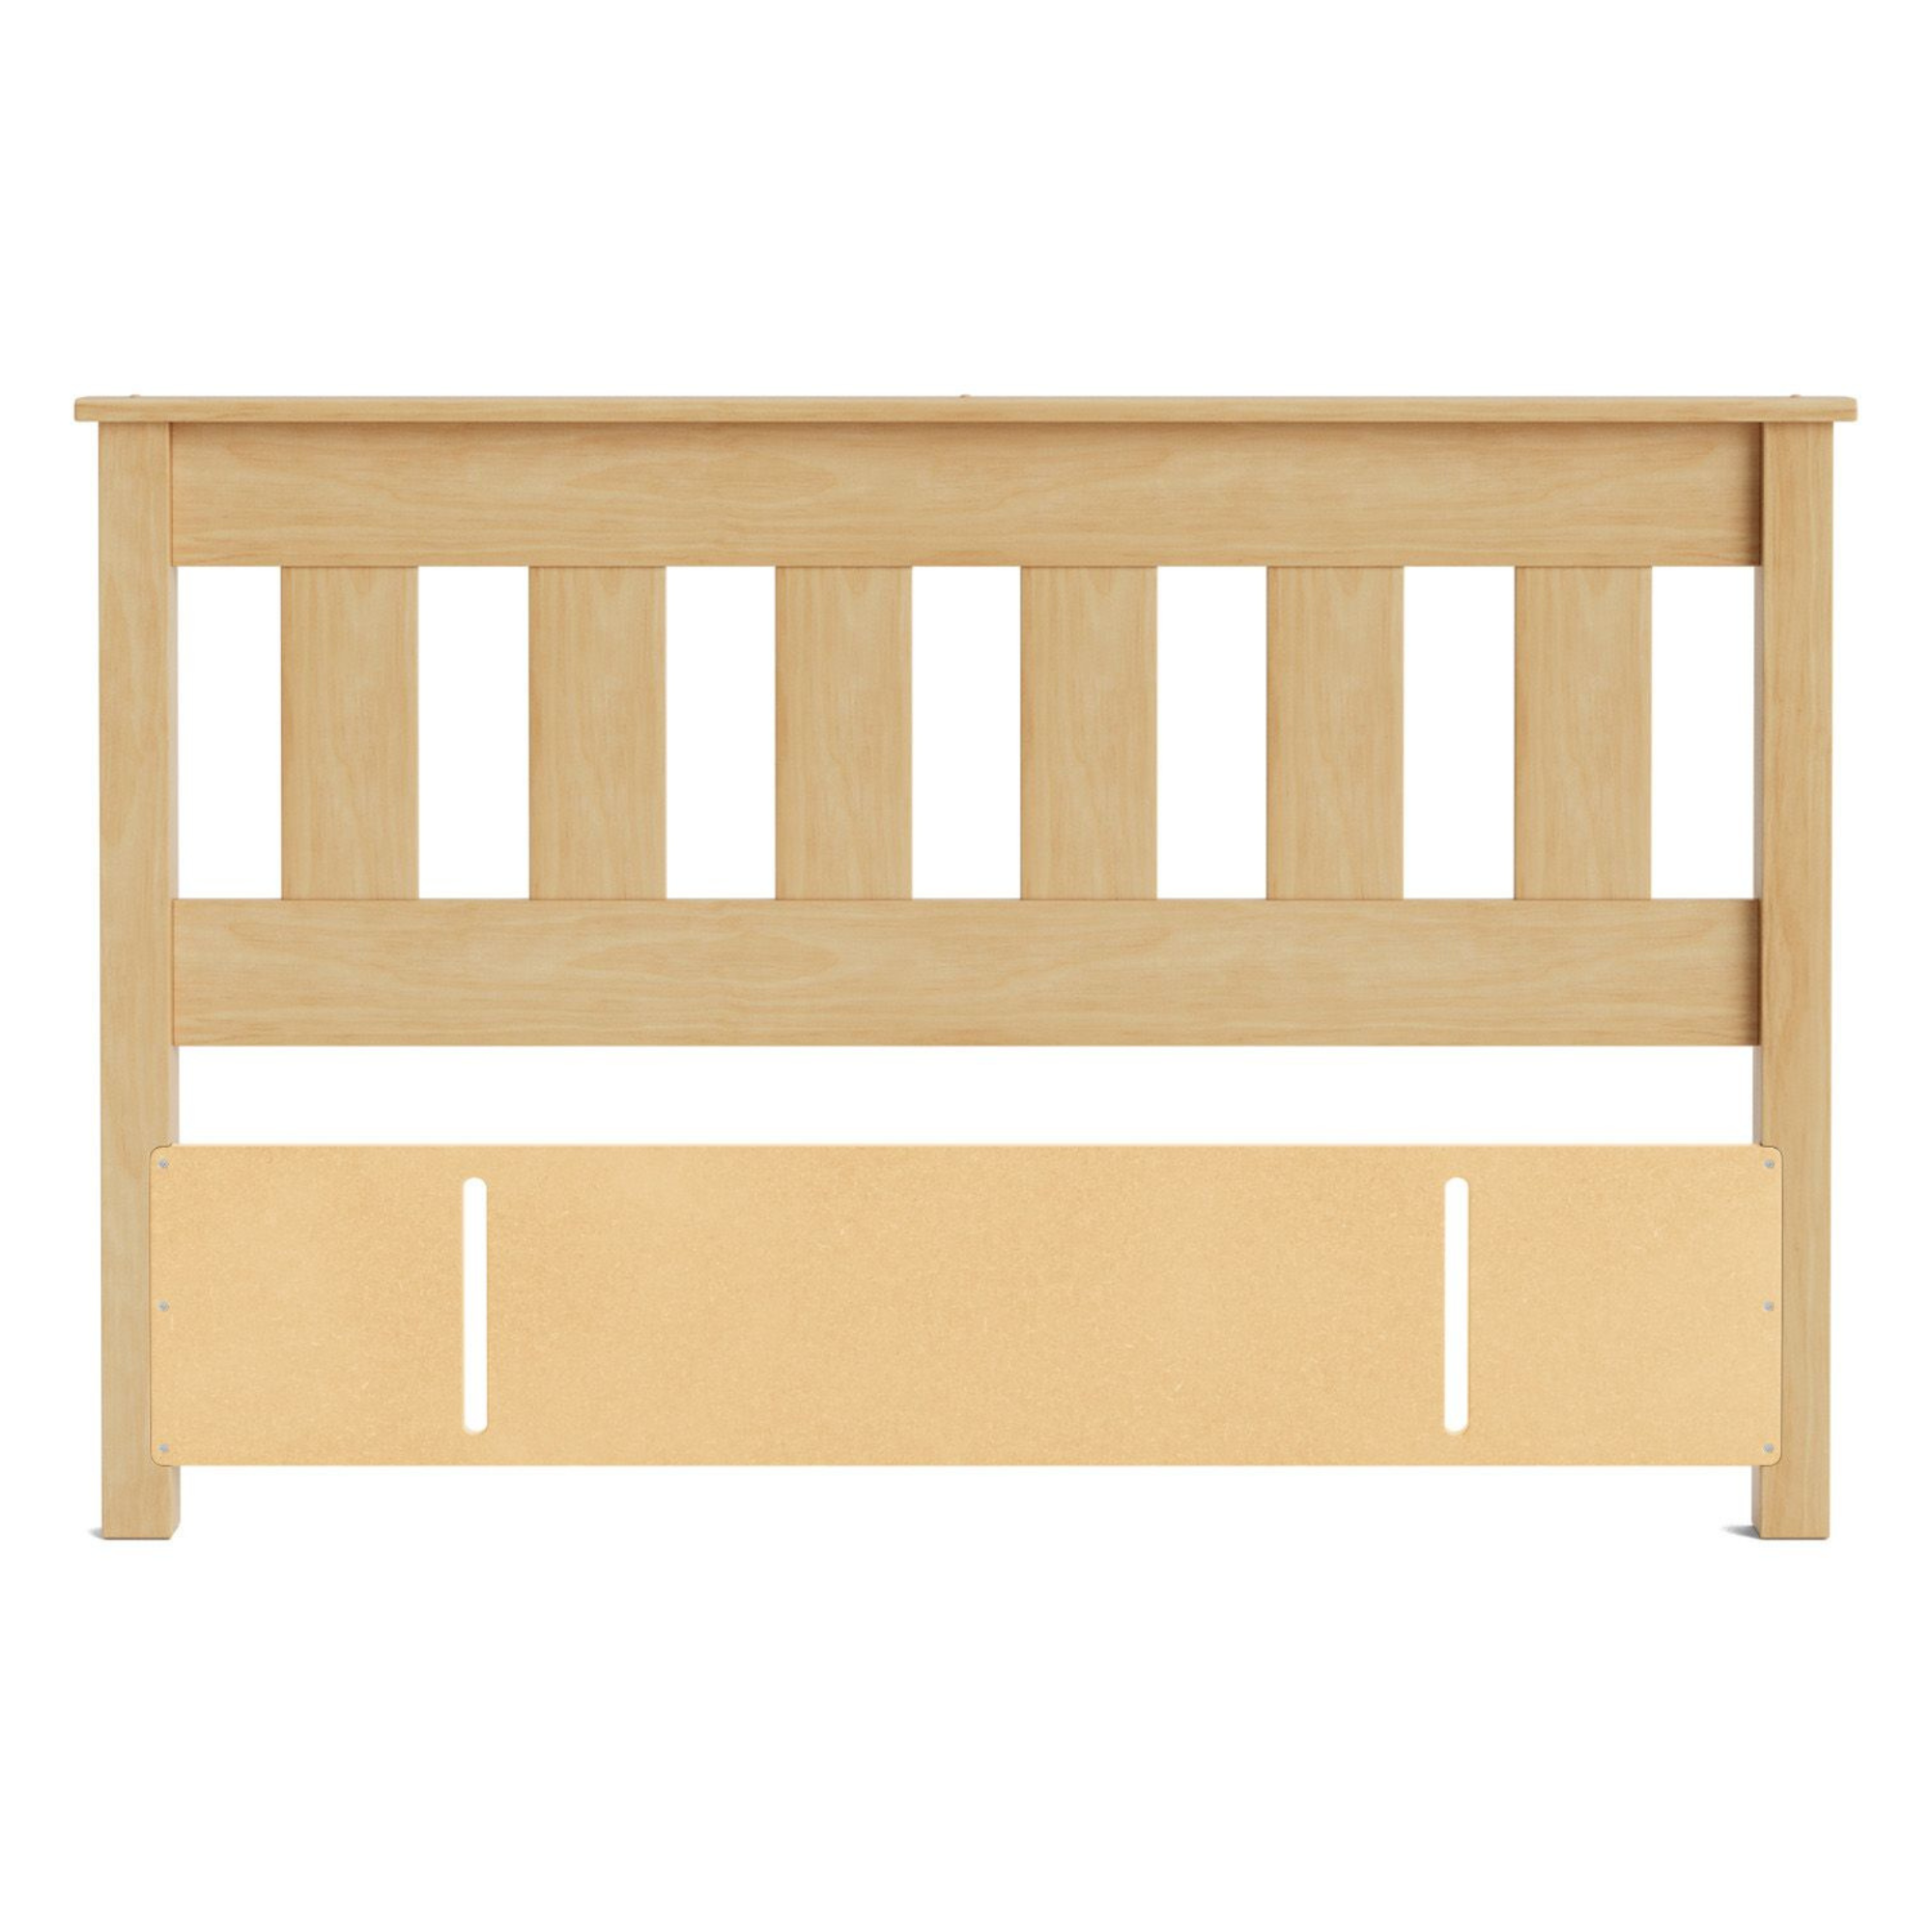 NORTHVILLE PANELLED OR SLATTED HEADBOARD | ALL SIZES | NZ MADE